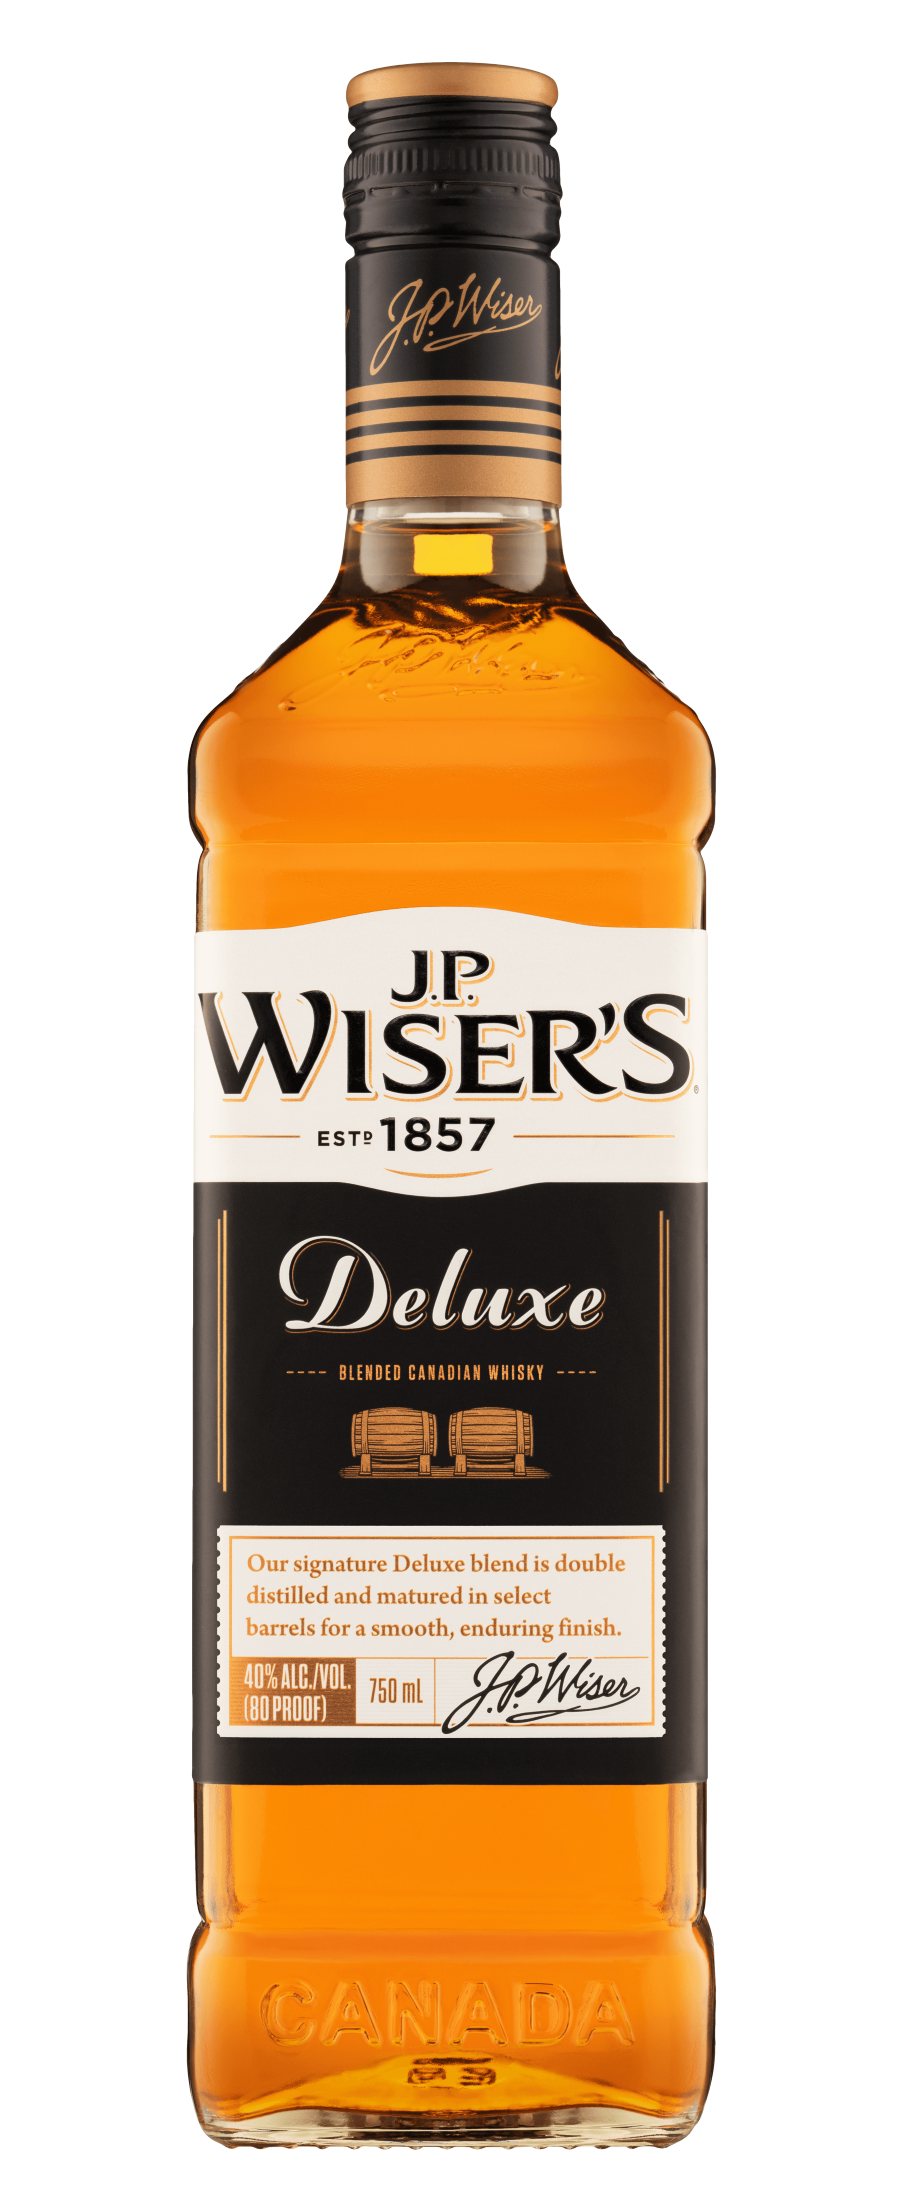 Wiser's Canadian Whisky Deluxe